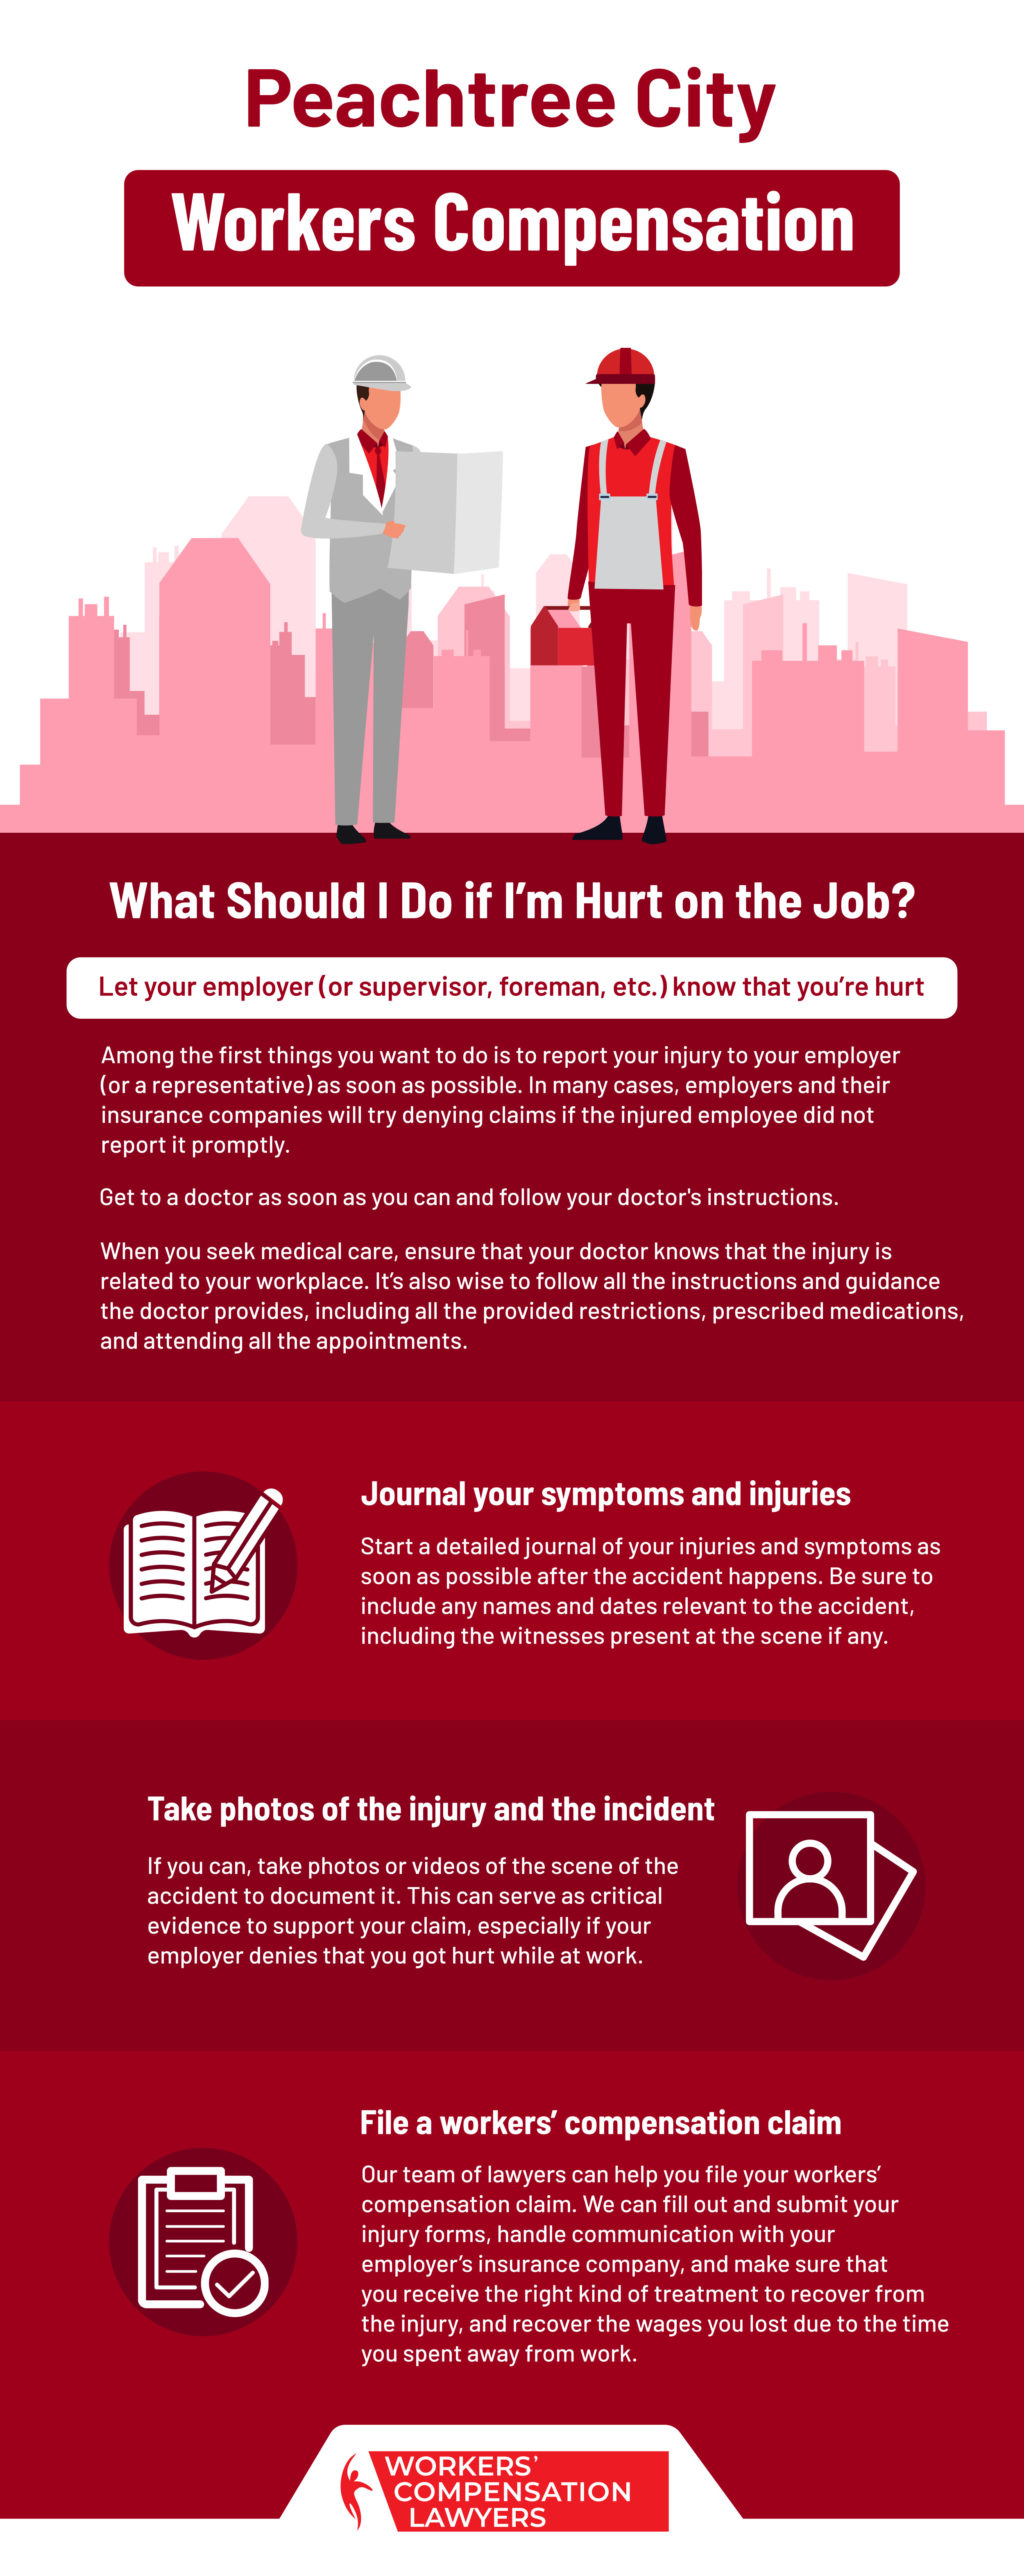 Peachtree City Workers Compensation Infographic